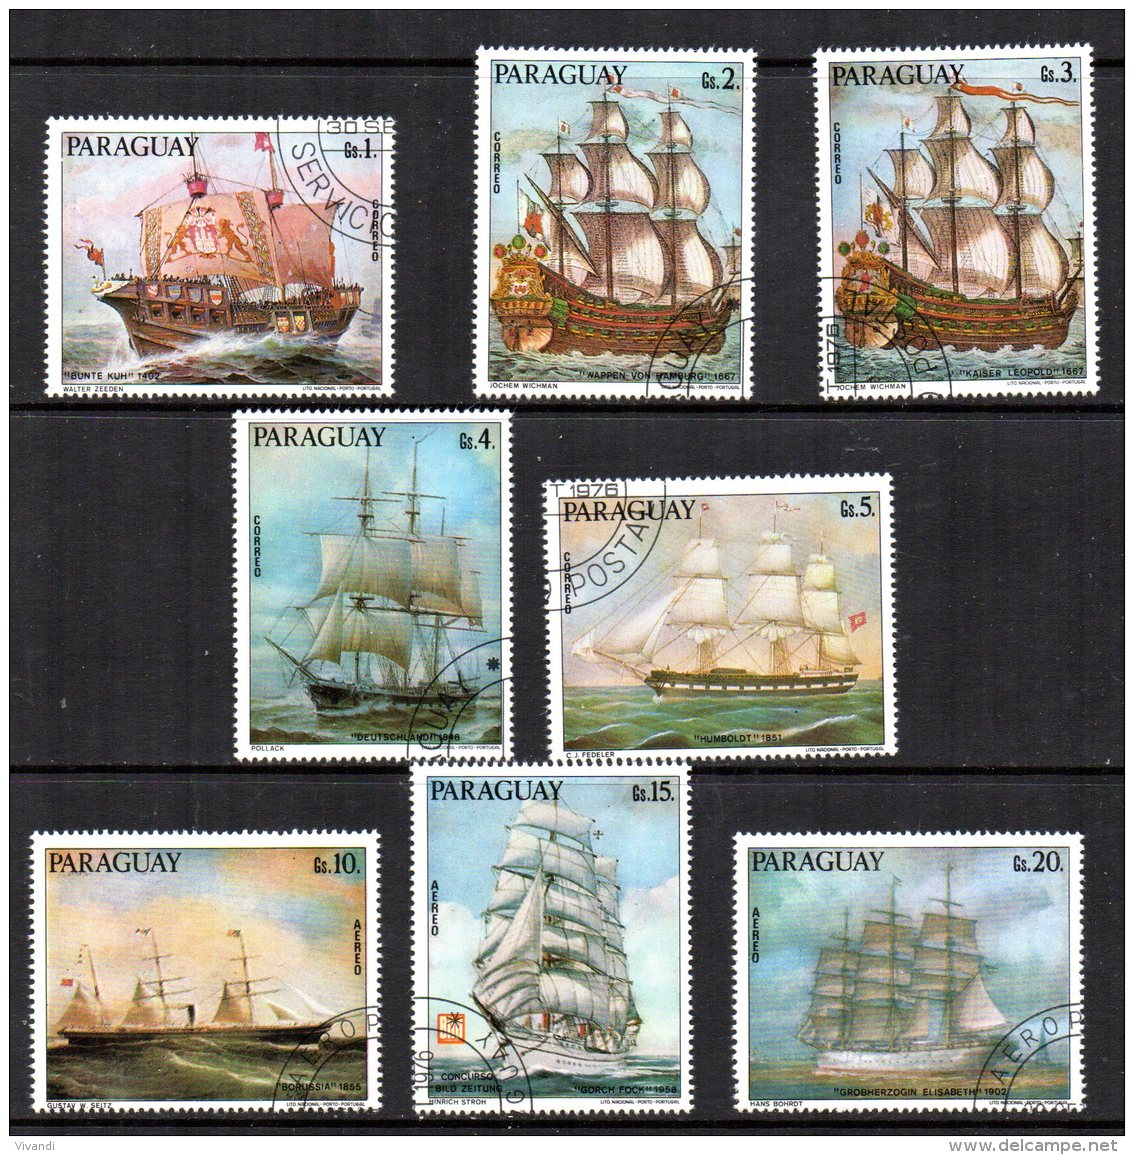 Paraguay - 1976 - Ship Paintings - Used/CTO - Paraguay